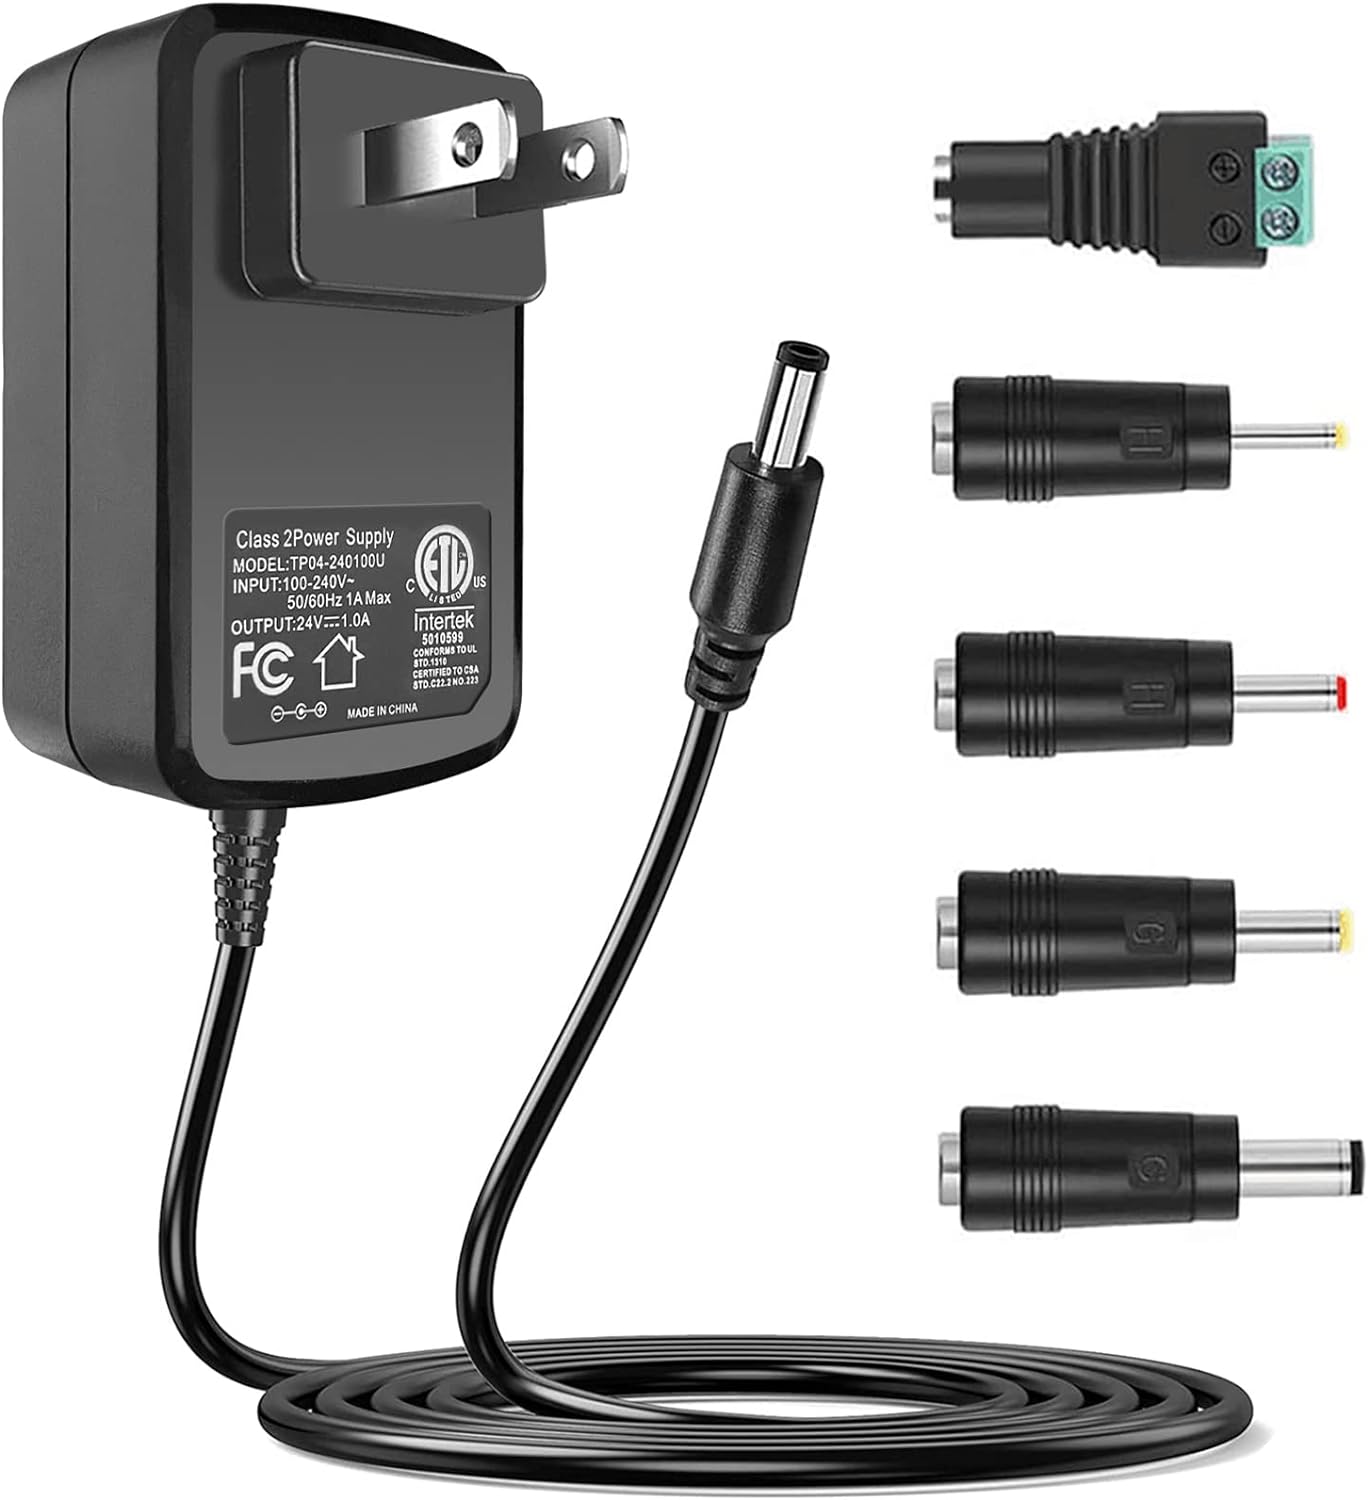 100V-240V to 24V 1A AC/DC Switching Power Supply Adapter with 5 Selectable Adapter Plugs Connector Type 2-Pin Compatibl